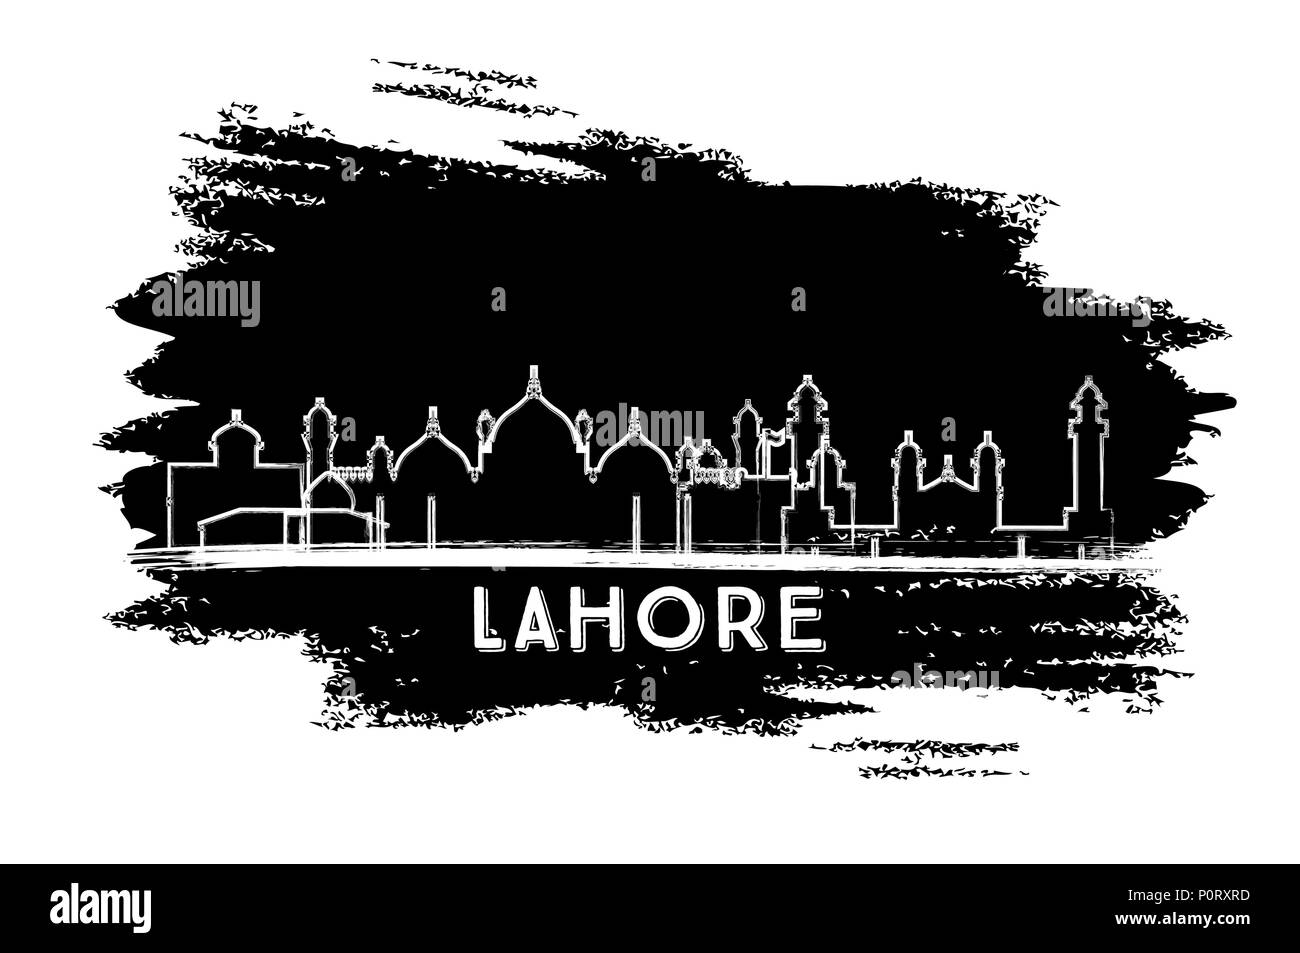 Lahore Pakistan City Skyline Silhouette. Hand Drawn Sketch. Business Travel and Tourism Concept with Historic Architecture. Stock Vector